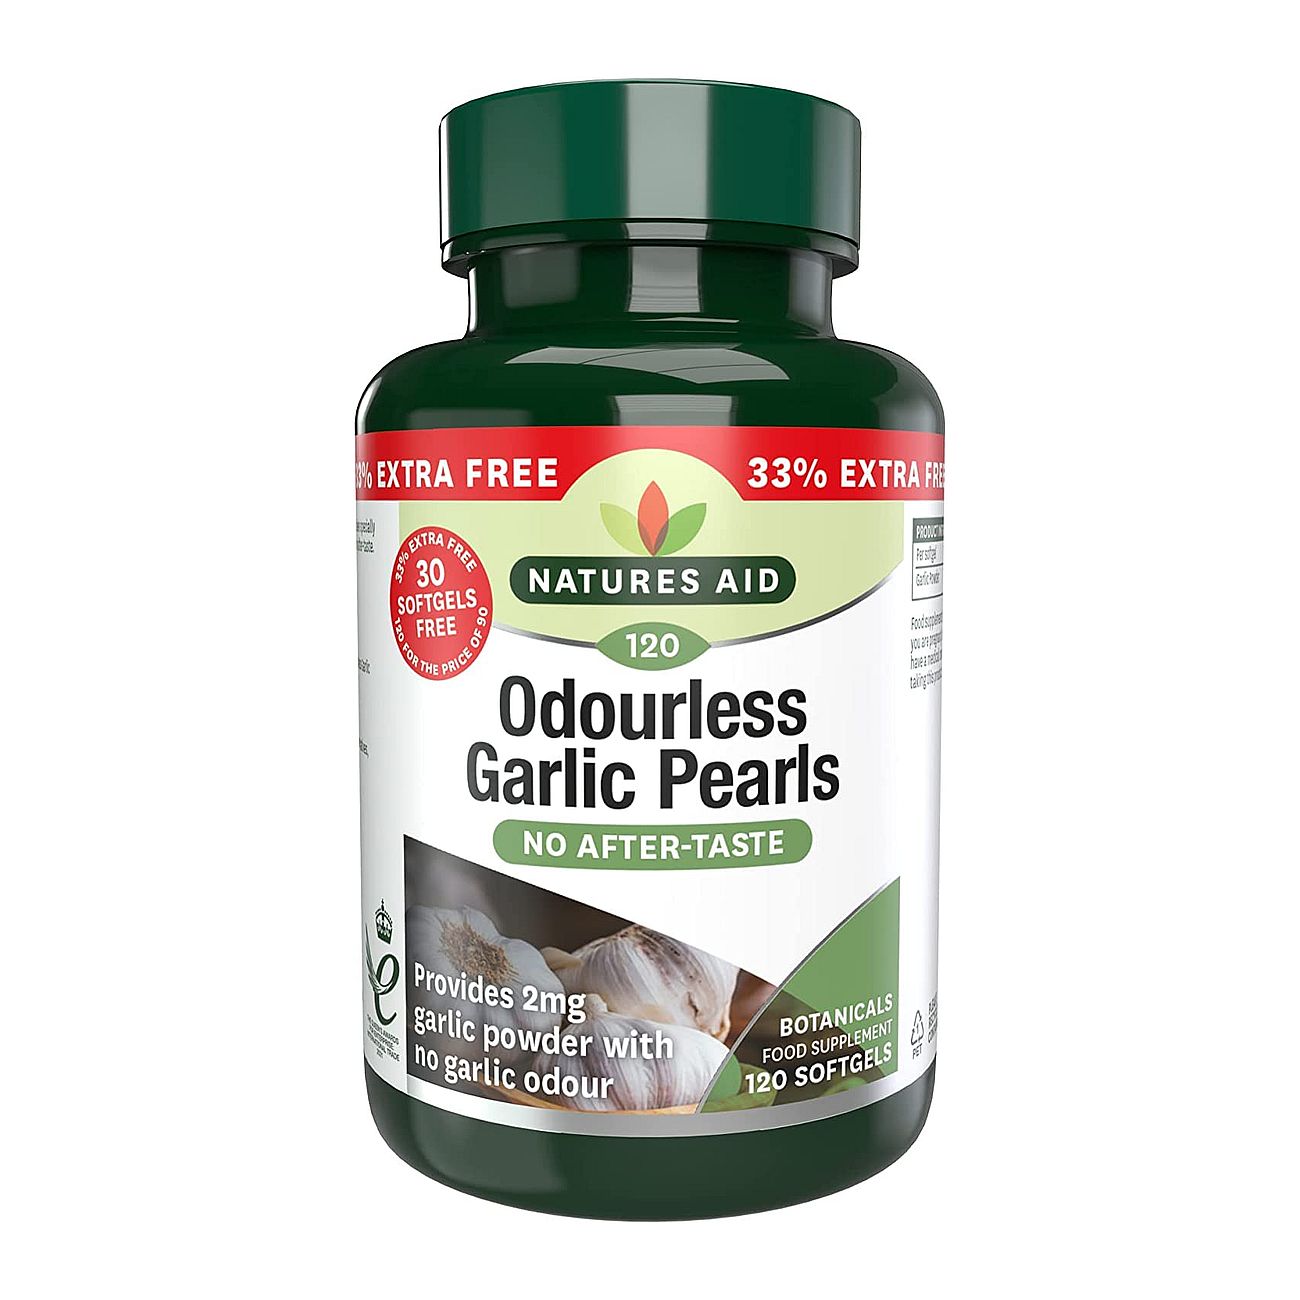 Garlic Pearls (Odourless) One-a-day - 120 Softgels